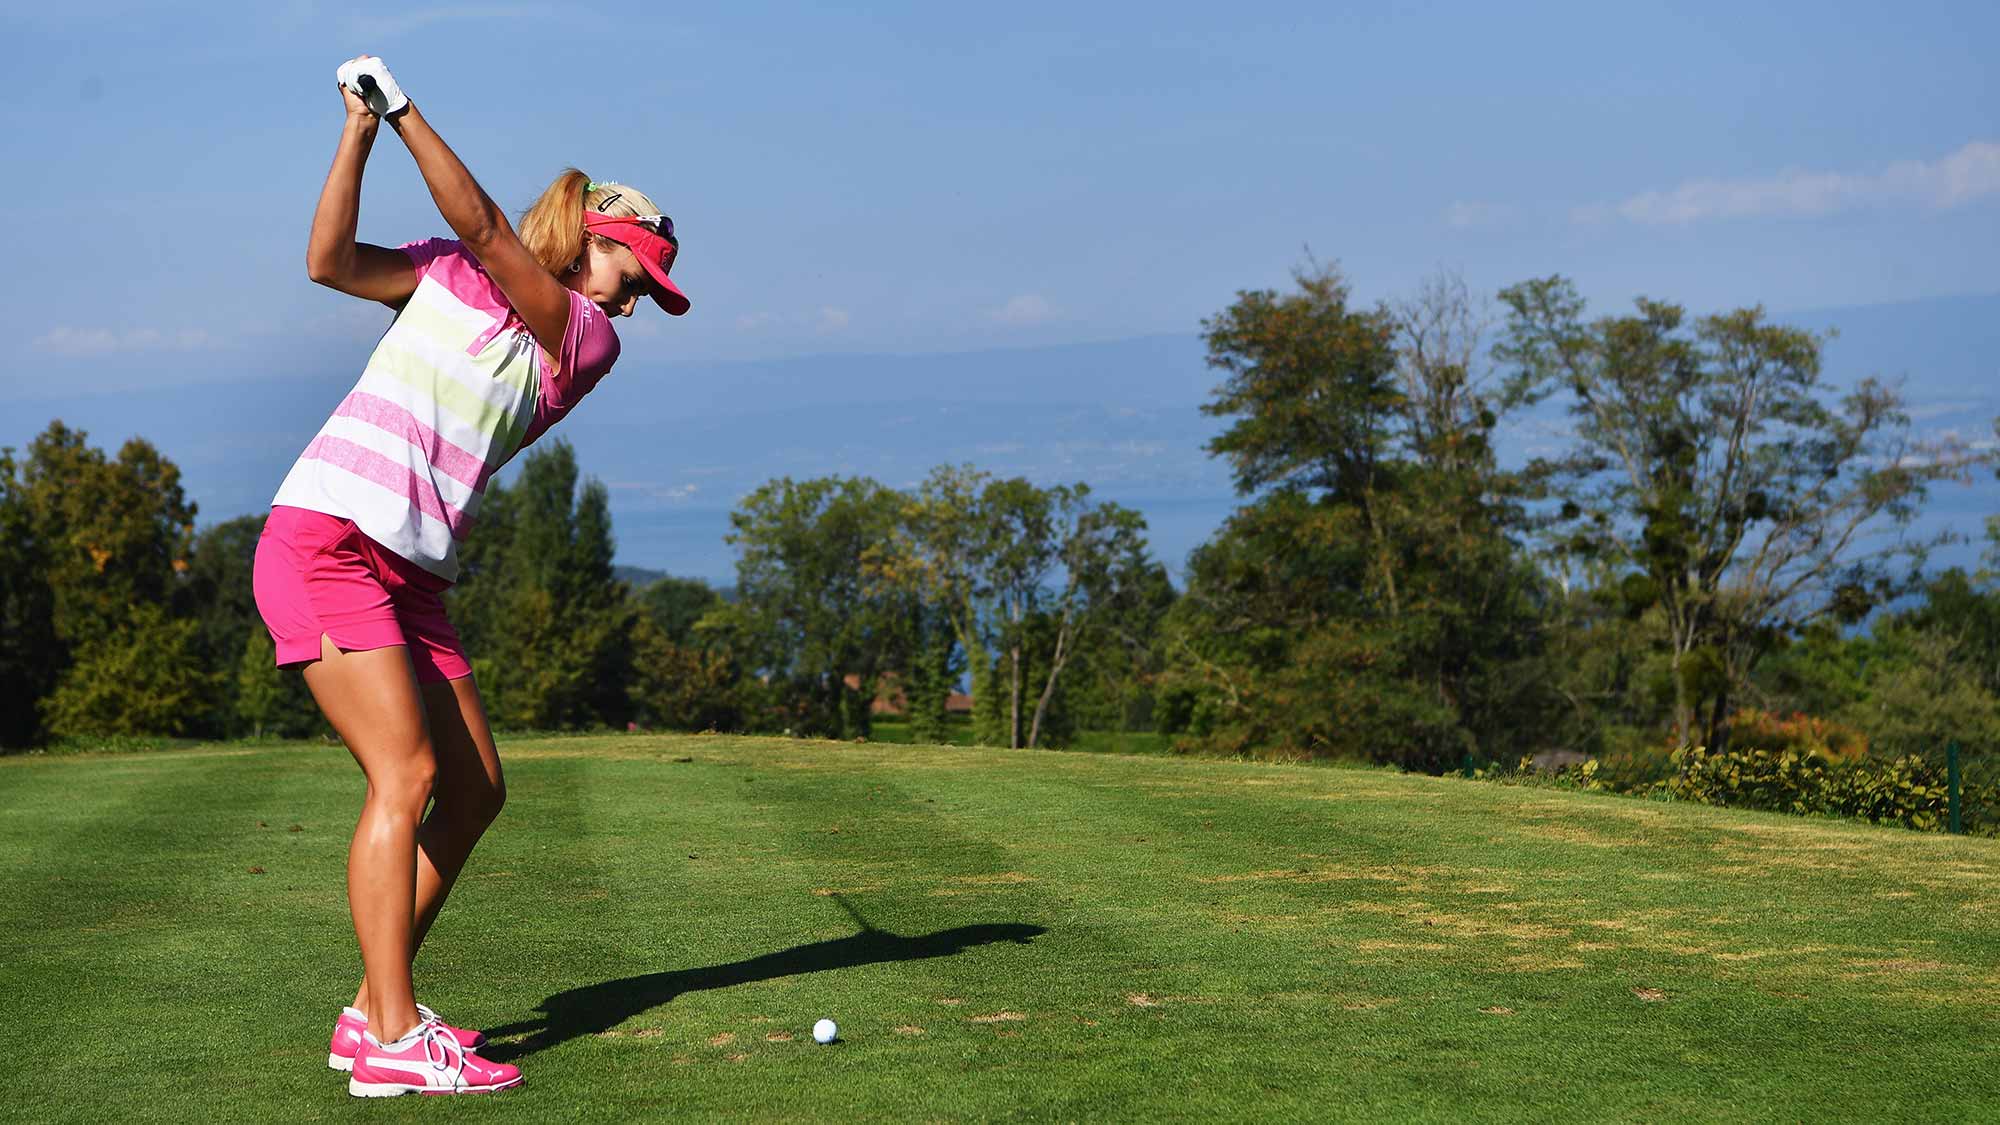 Lexi Thompson of USA plays a shot during practice prior to the start of the Evian Championship